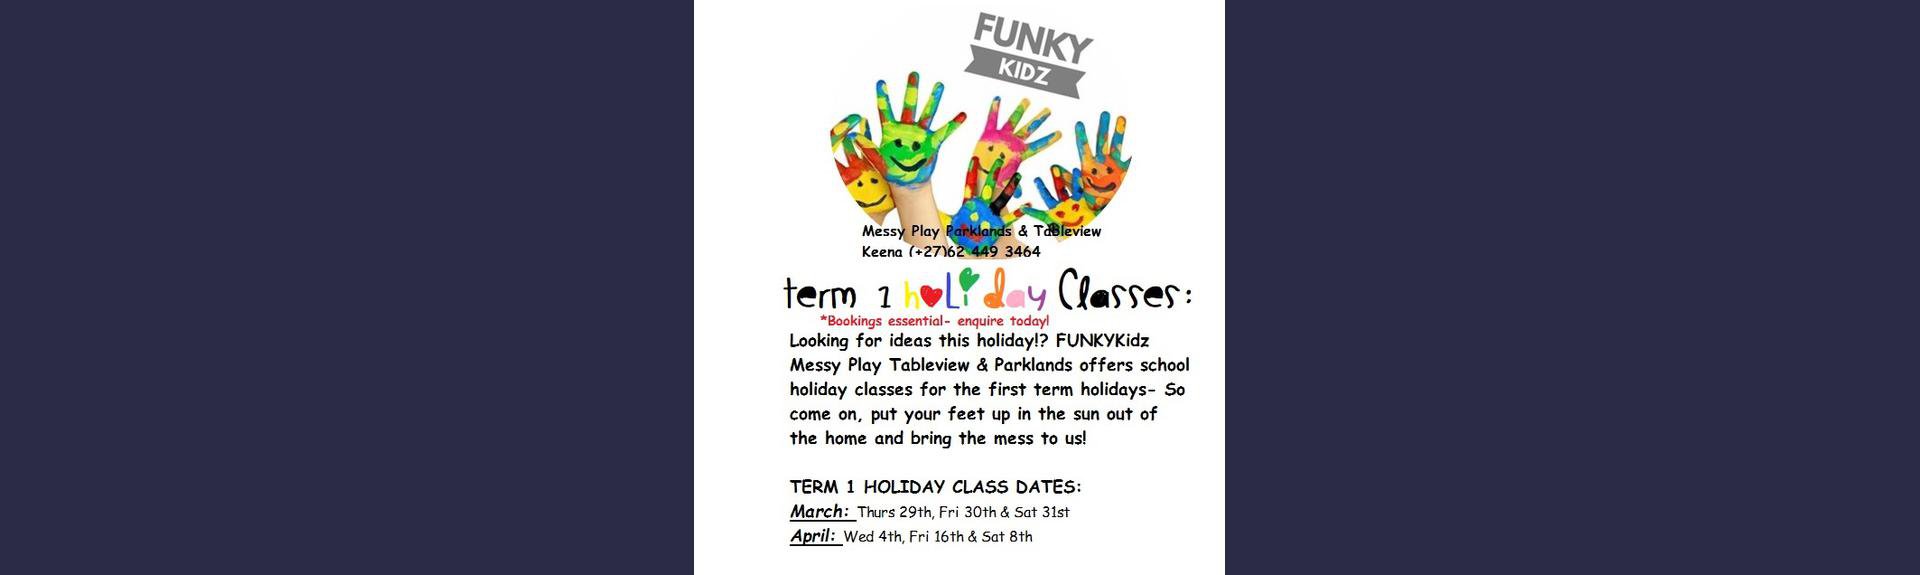 SCHOOL HOLIDAY CLASSES TERM 1-FUNKYKIDZ MESSY PLAY TABLEVIEW & PARKLANDS